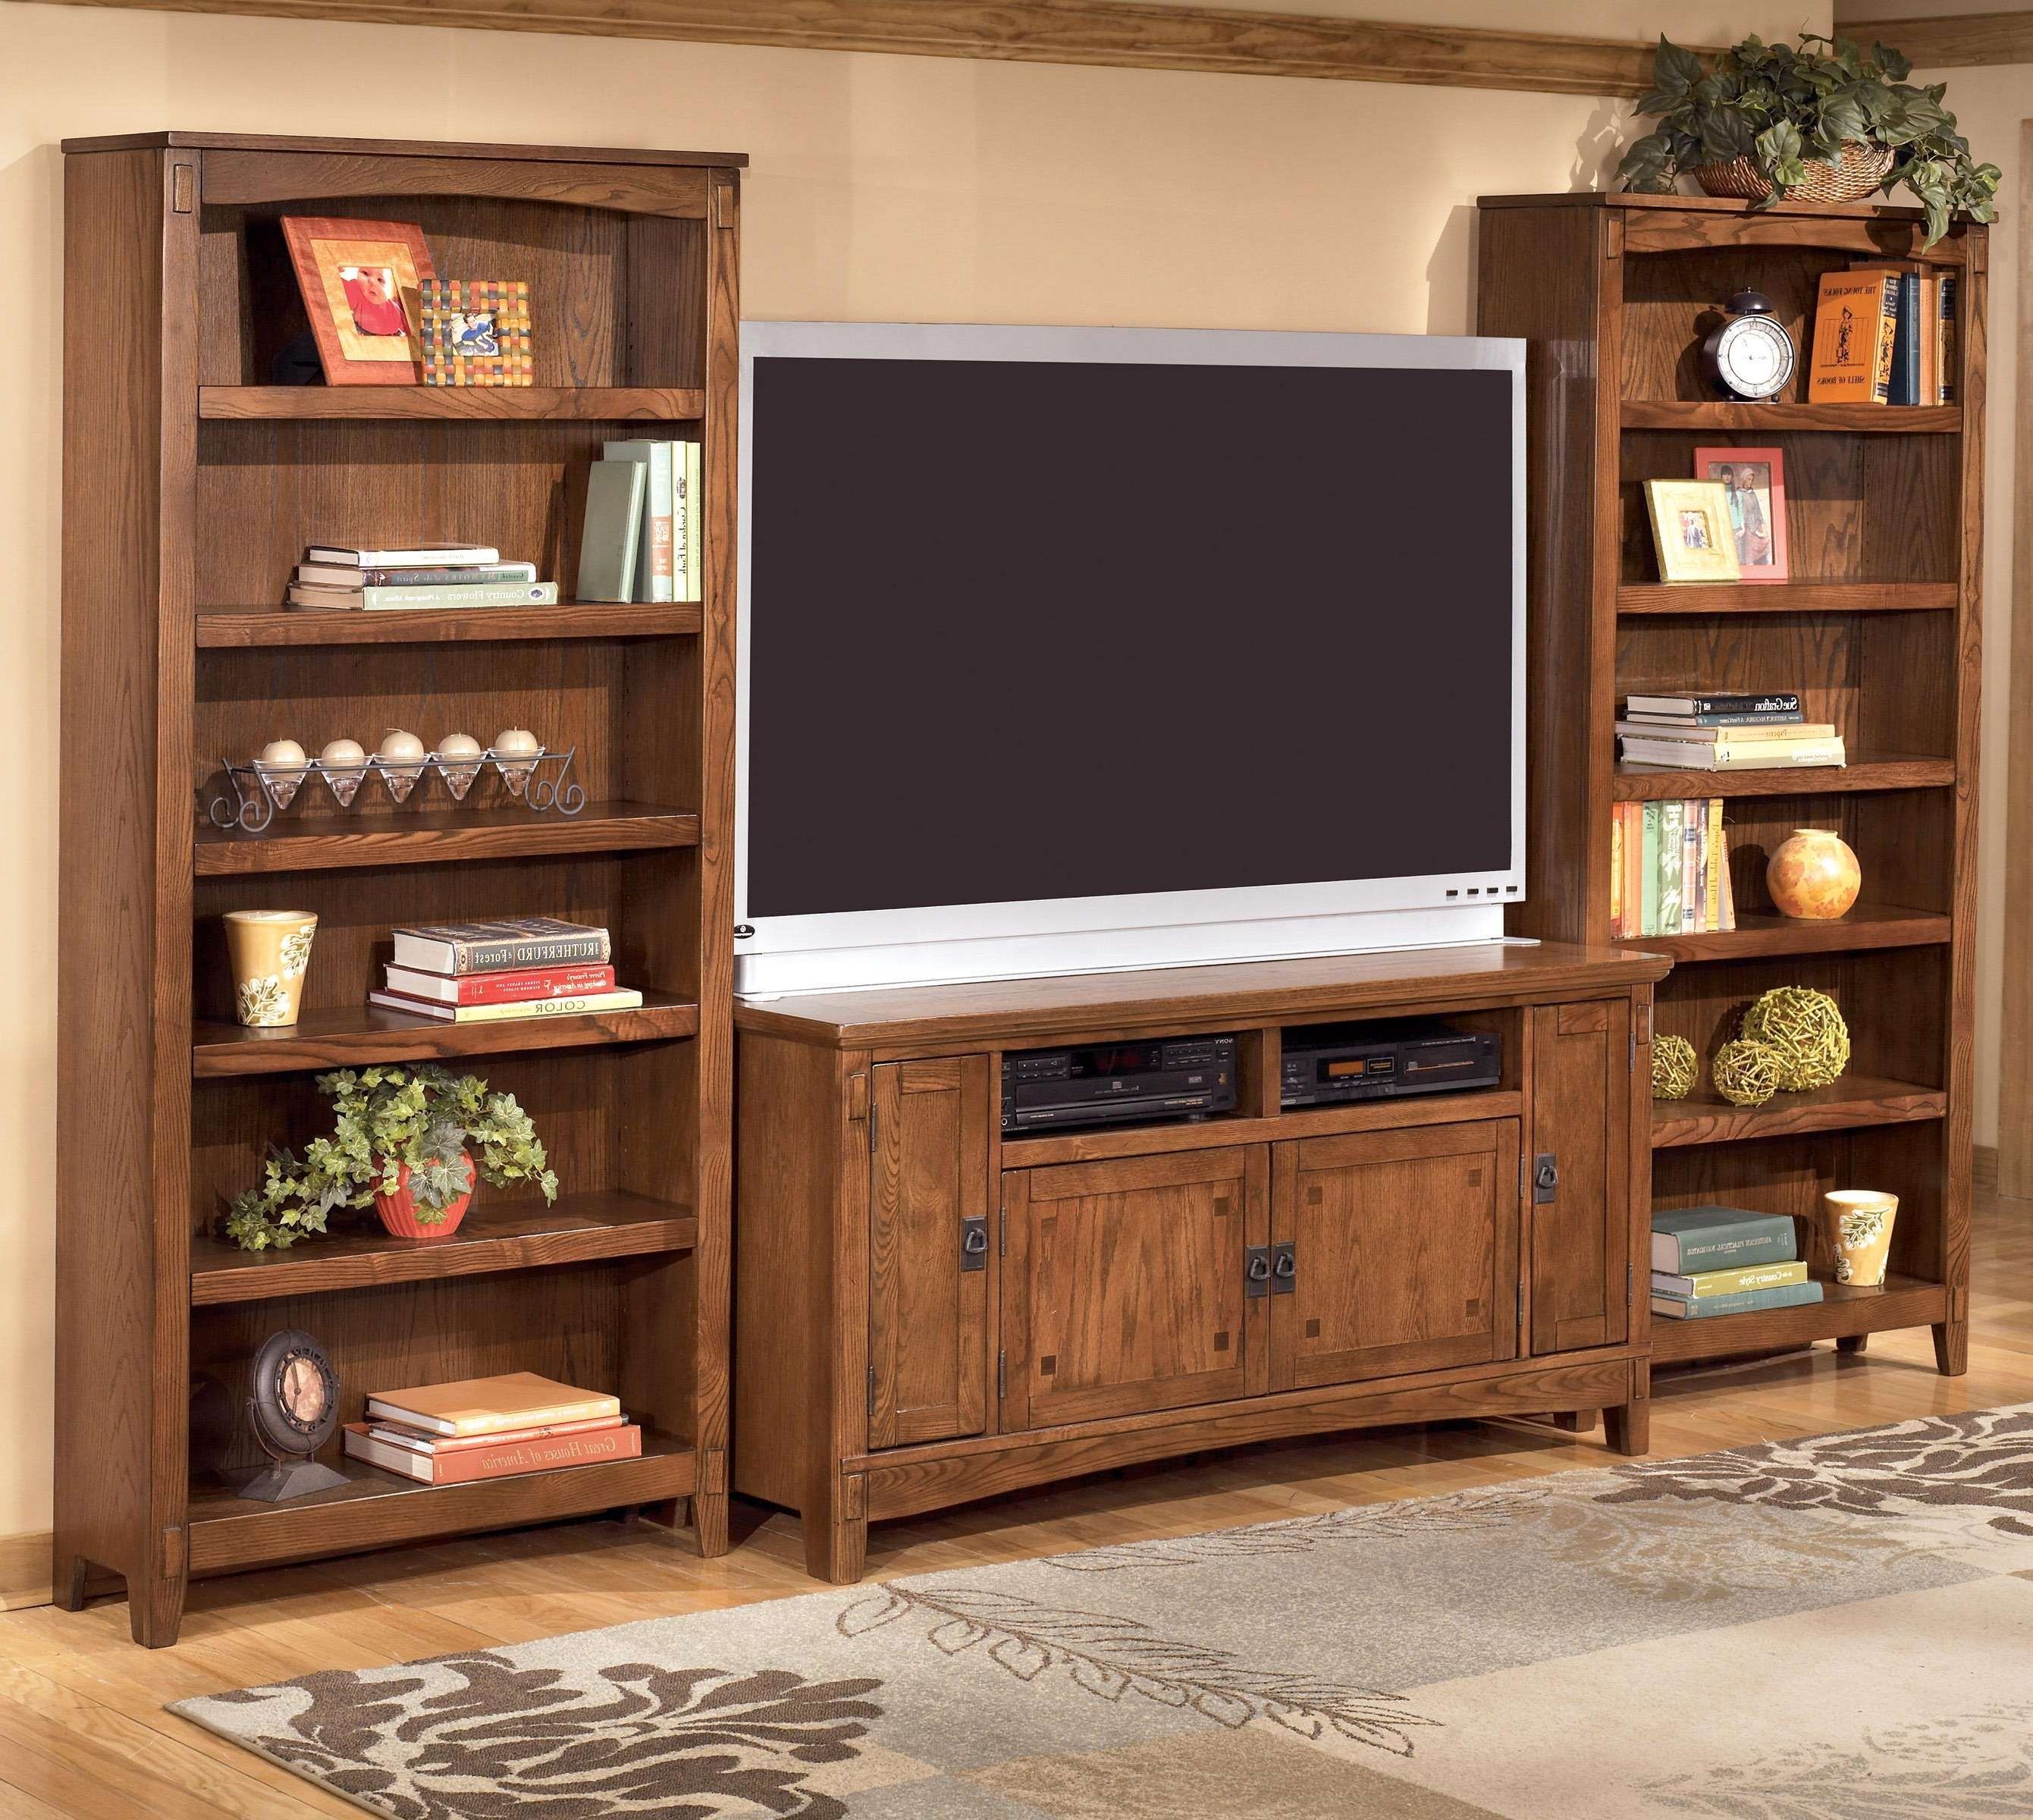 60 Inch Tv Stand & 2 Large Bookcasesashley Furniture | Wolf In Tv Stands With Bookcases (Gallery 1 of 15)